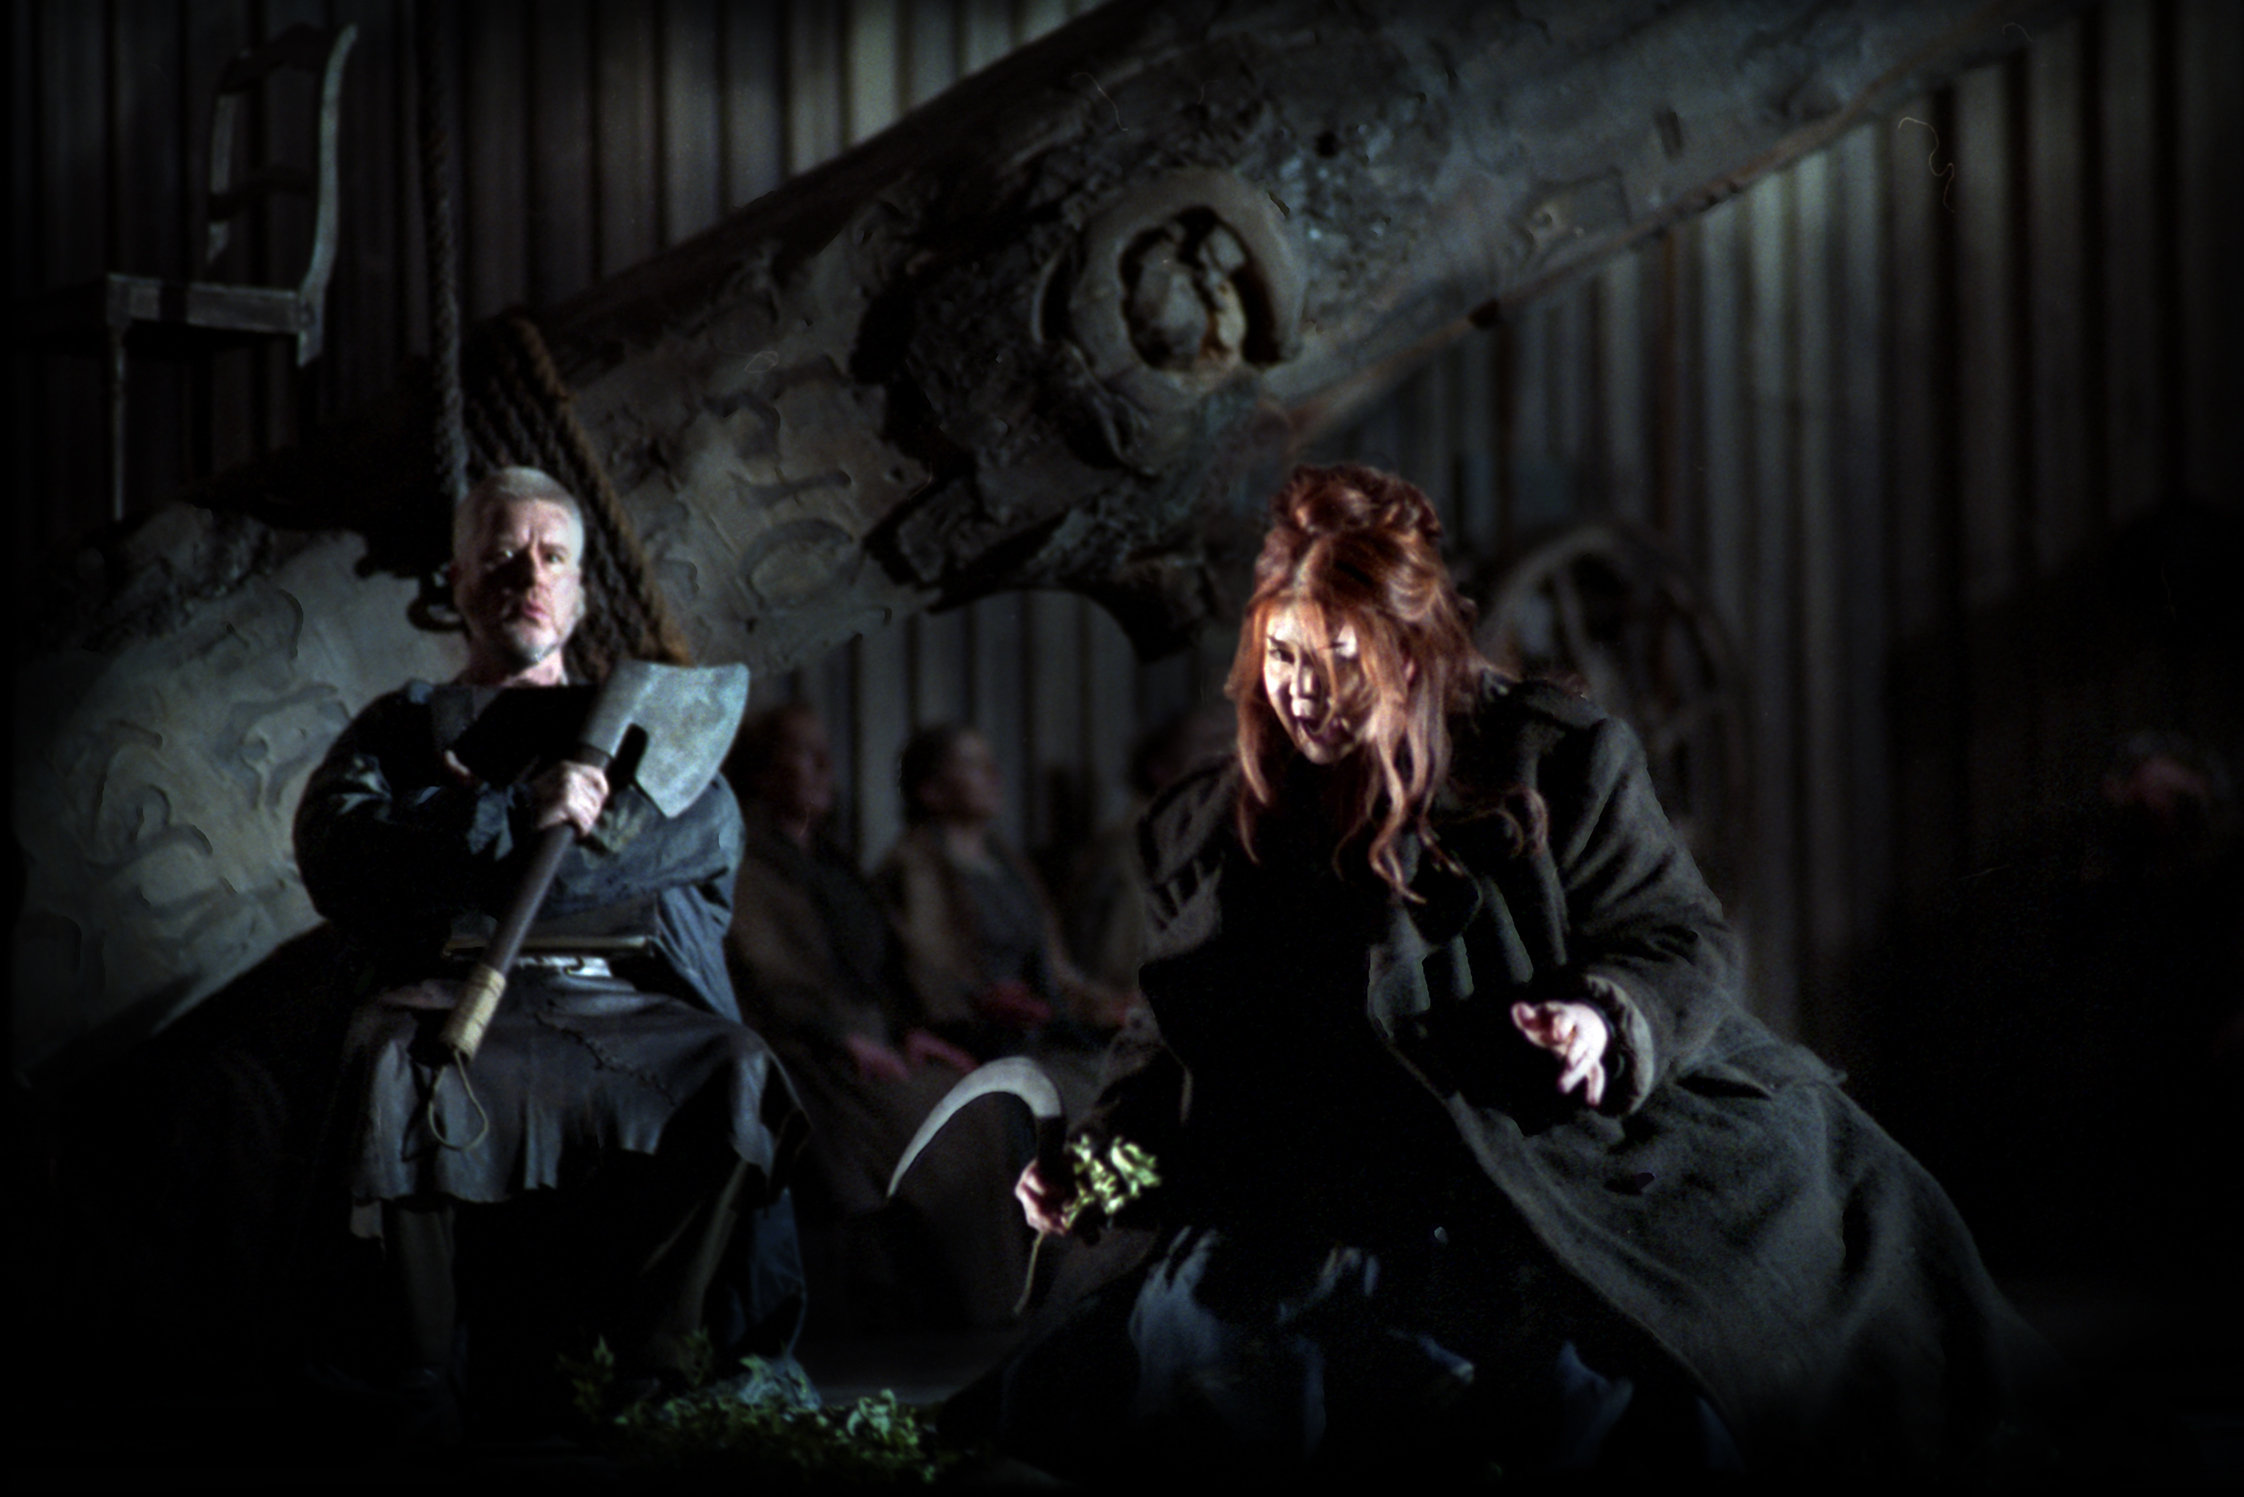 James Cresswell and Marjorie Owens in Norma